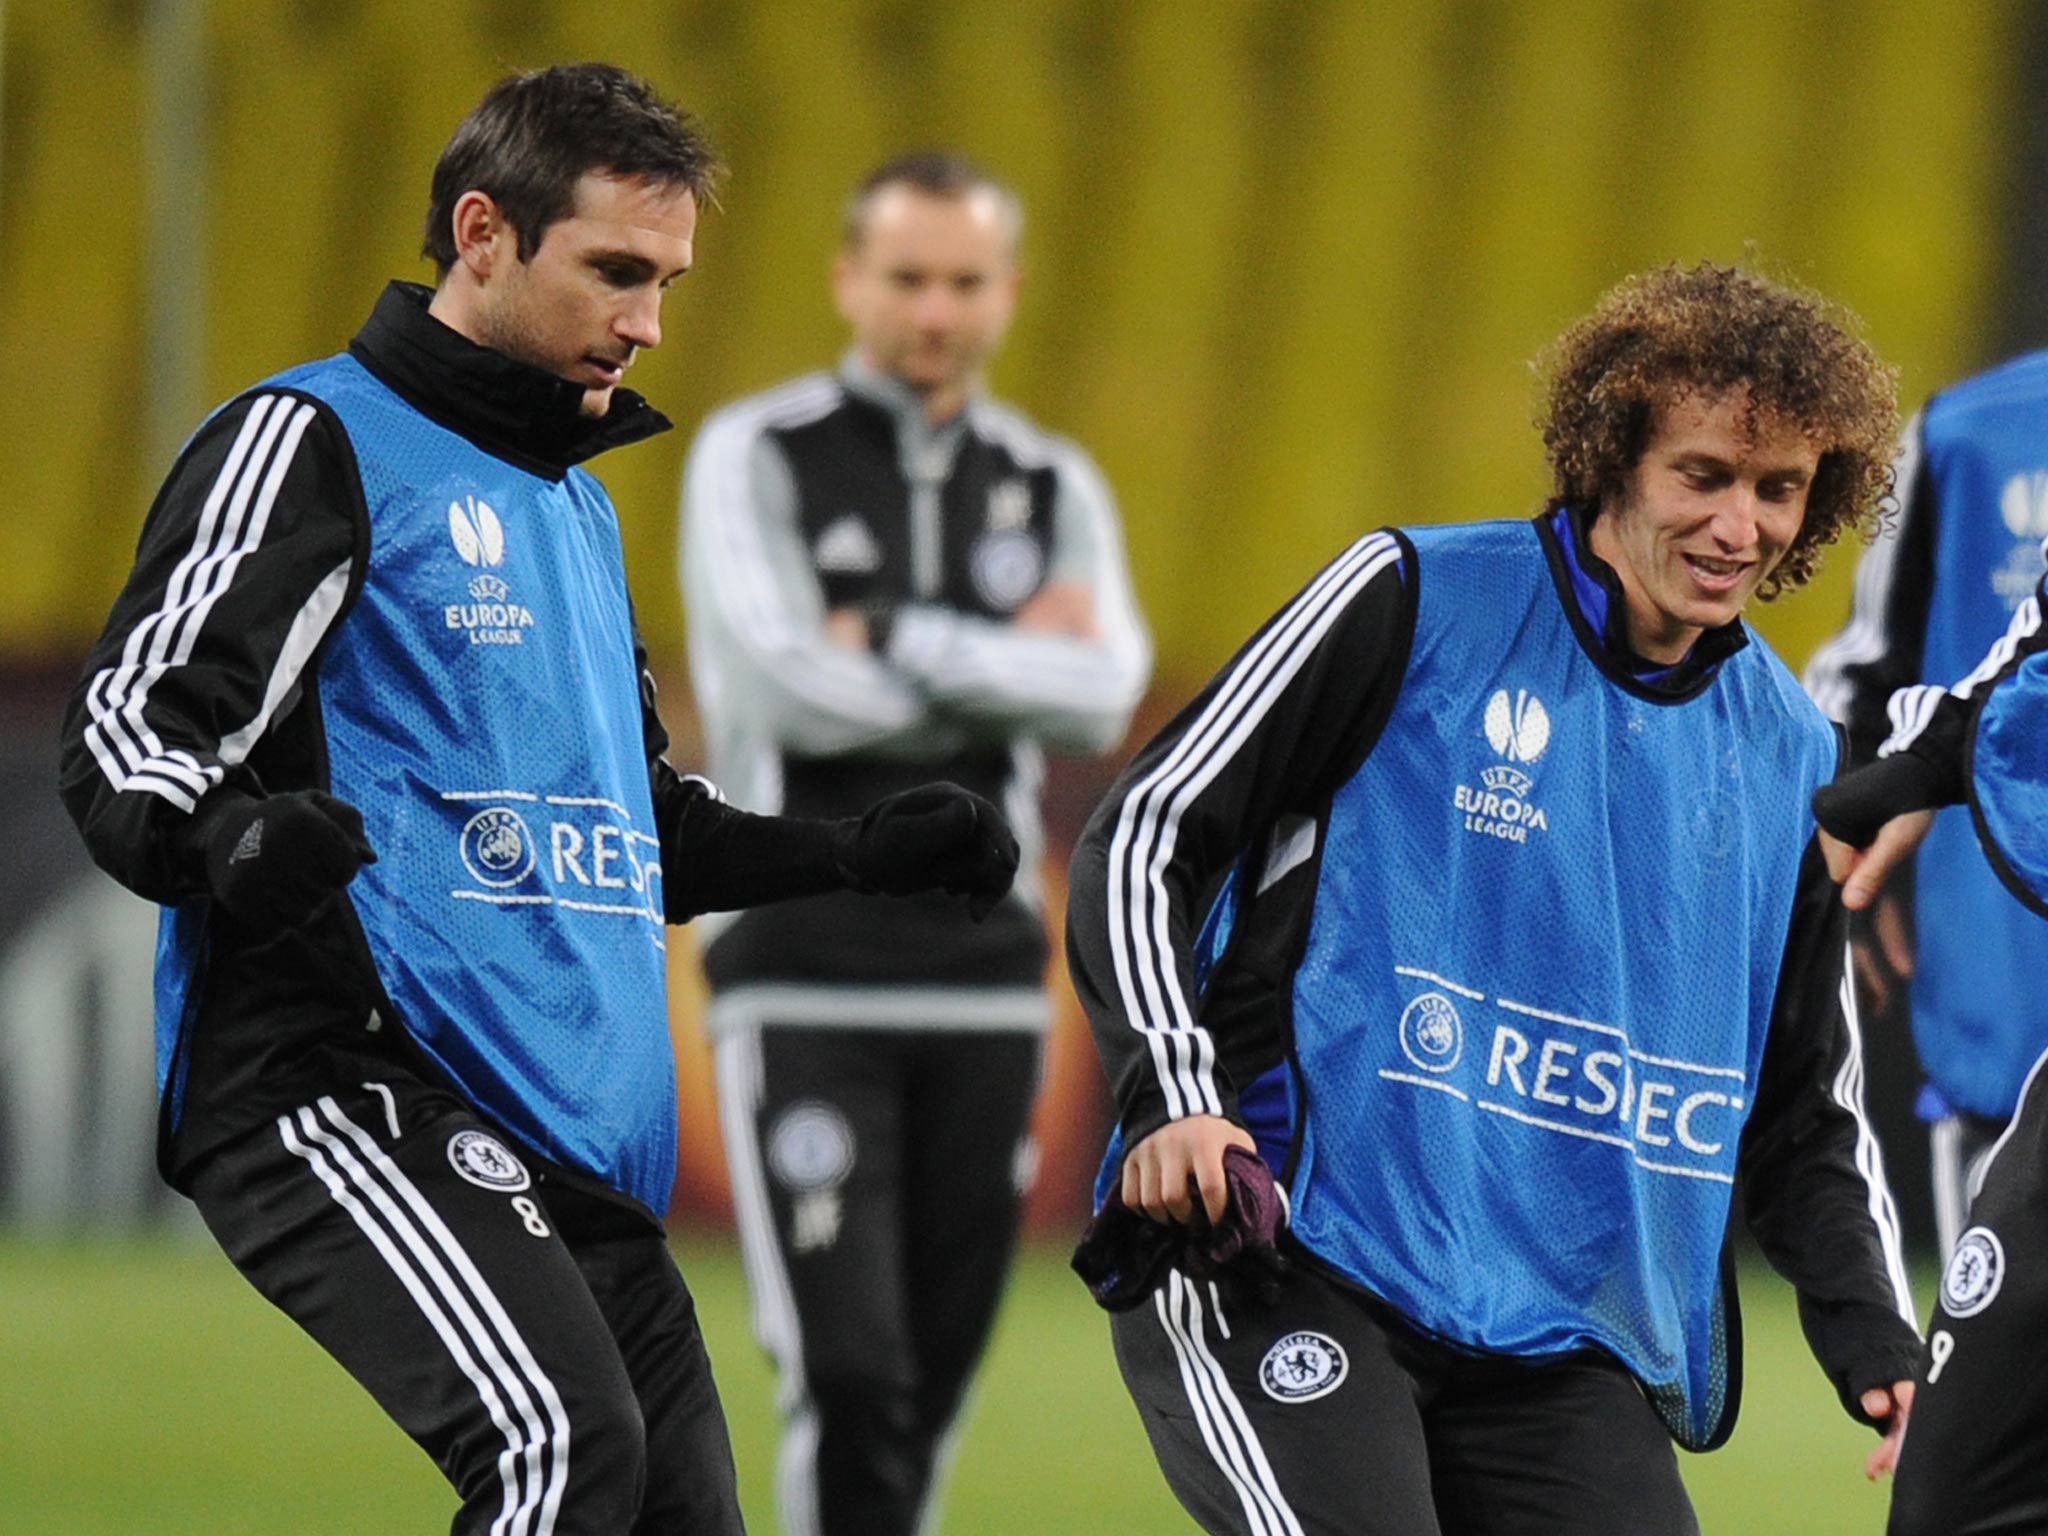 Frank Lampard and David Luiz pictured ahead of their quarter-final